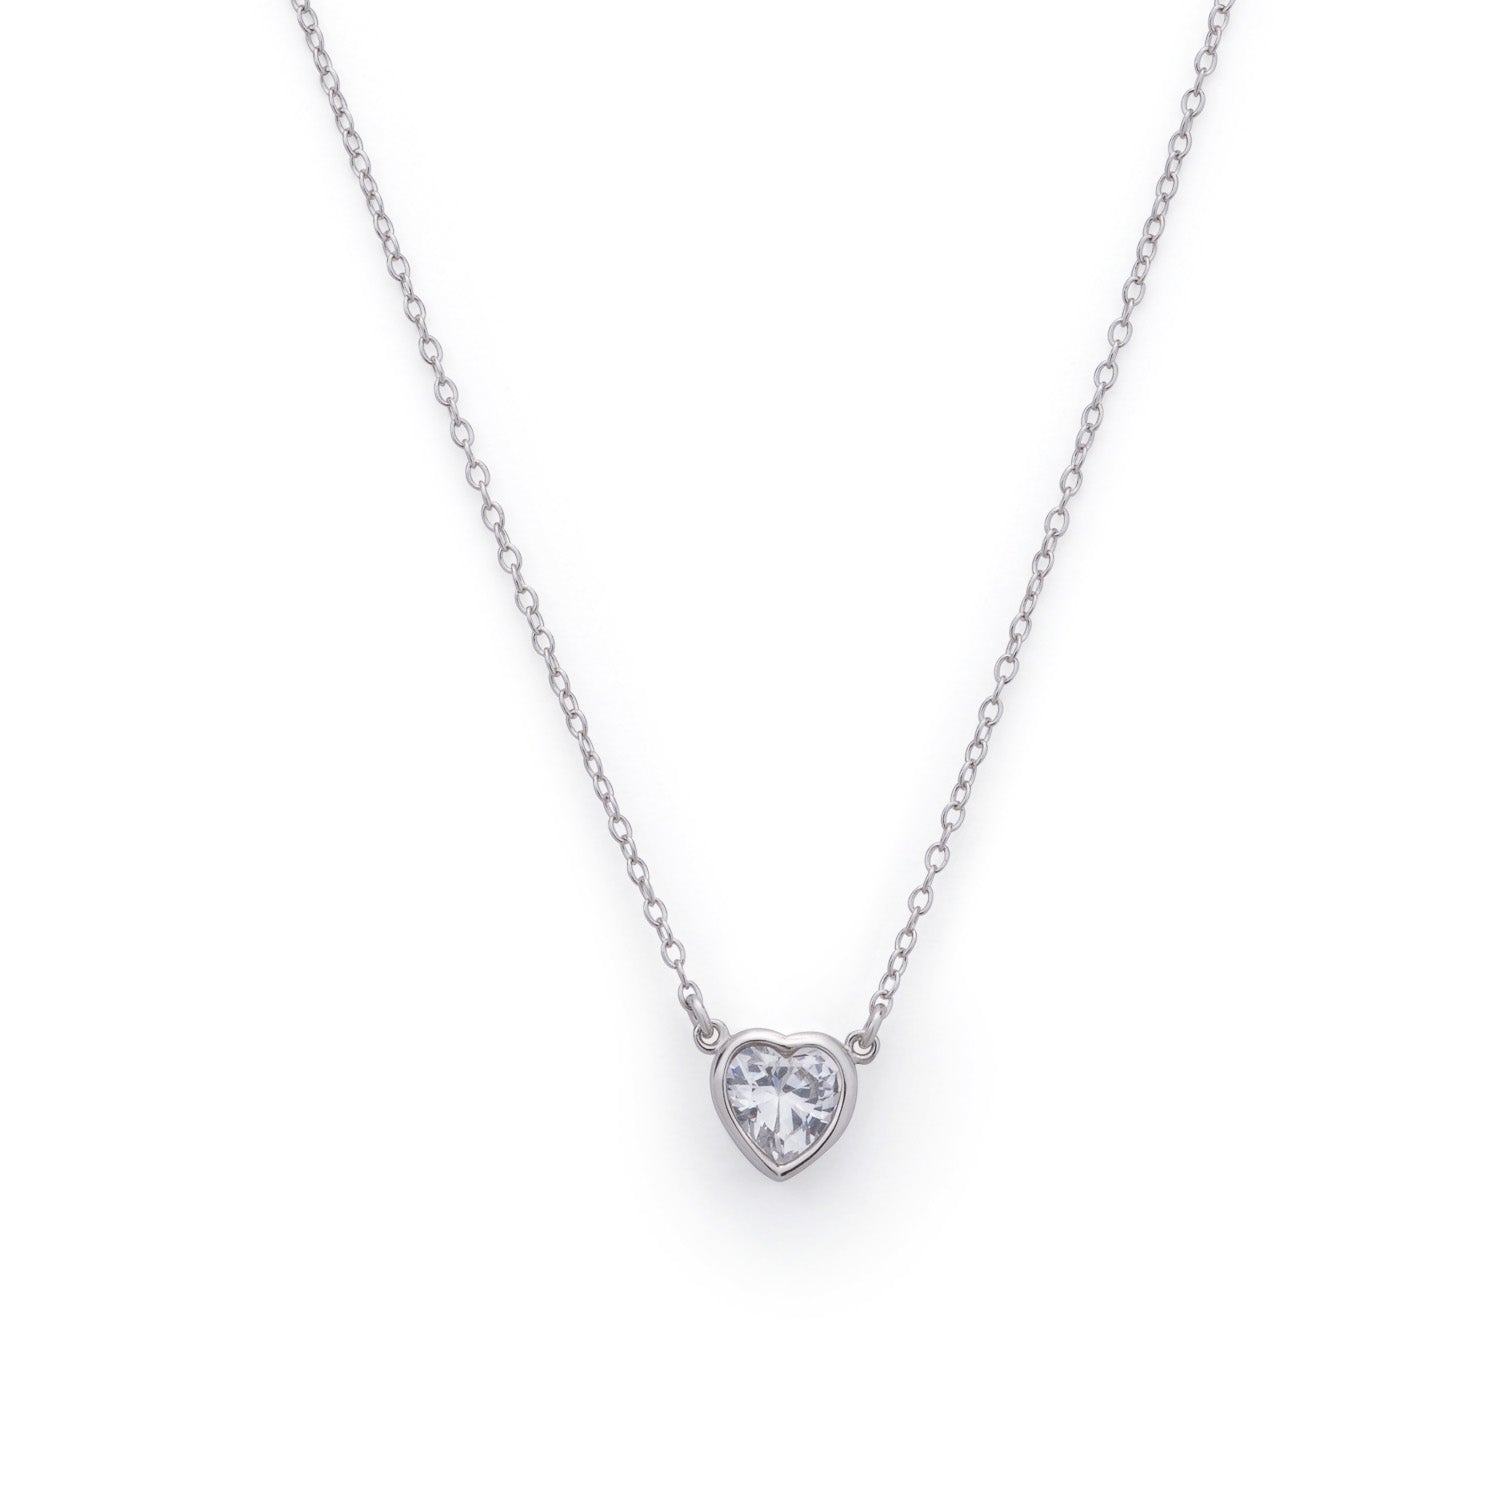 Heart Silver Necklace with Cubic Zironia